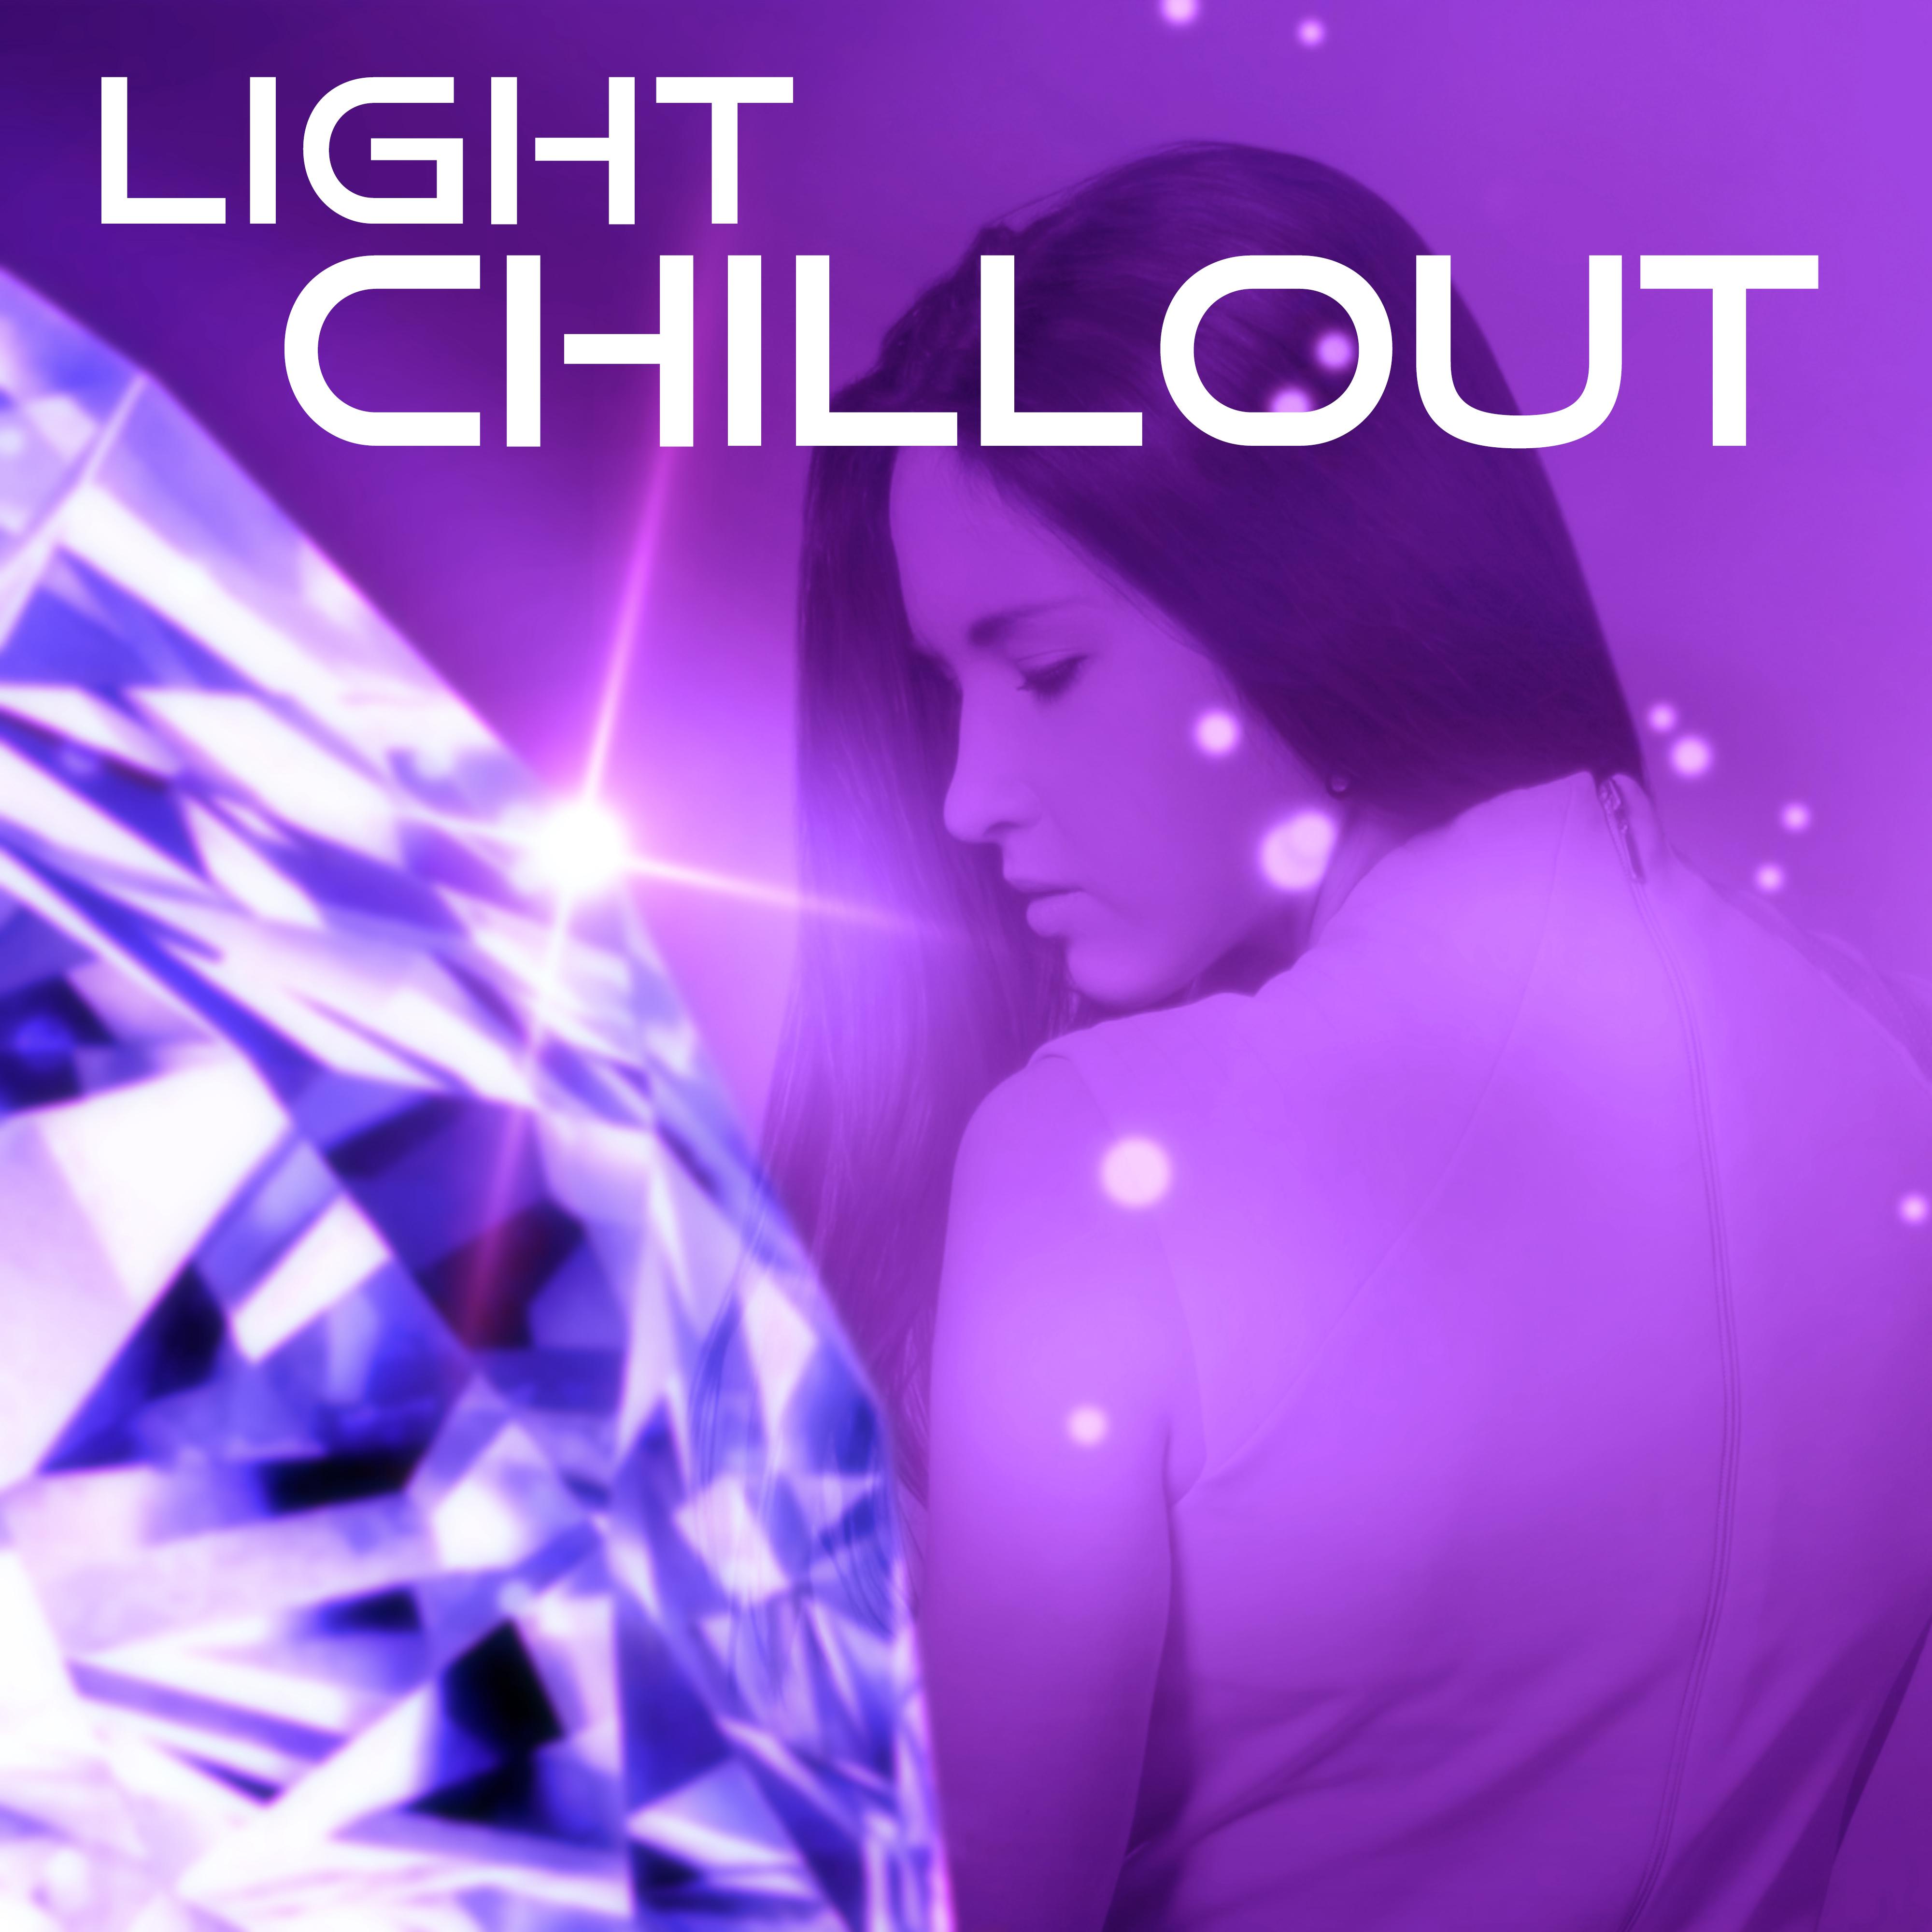 Light Chillout  Easy Listening Chillout Music, Deep Lounge, Chill Out 2016, Chill Collection, Relaxation, Dance Party, Cocktail Party, Deep Ambience